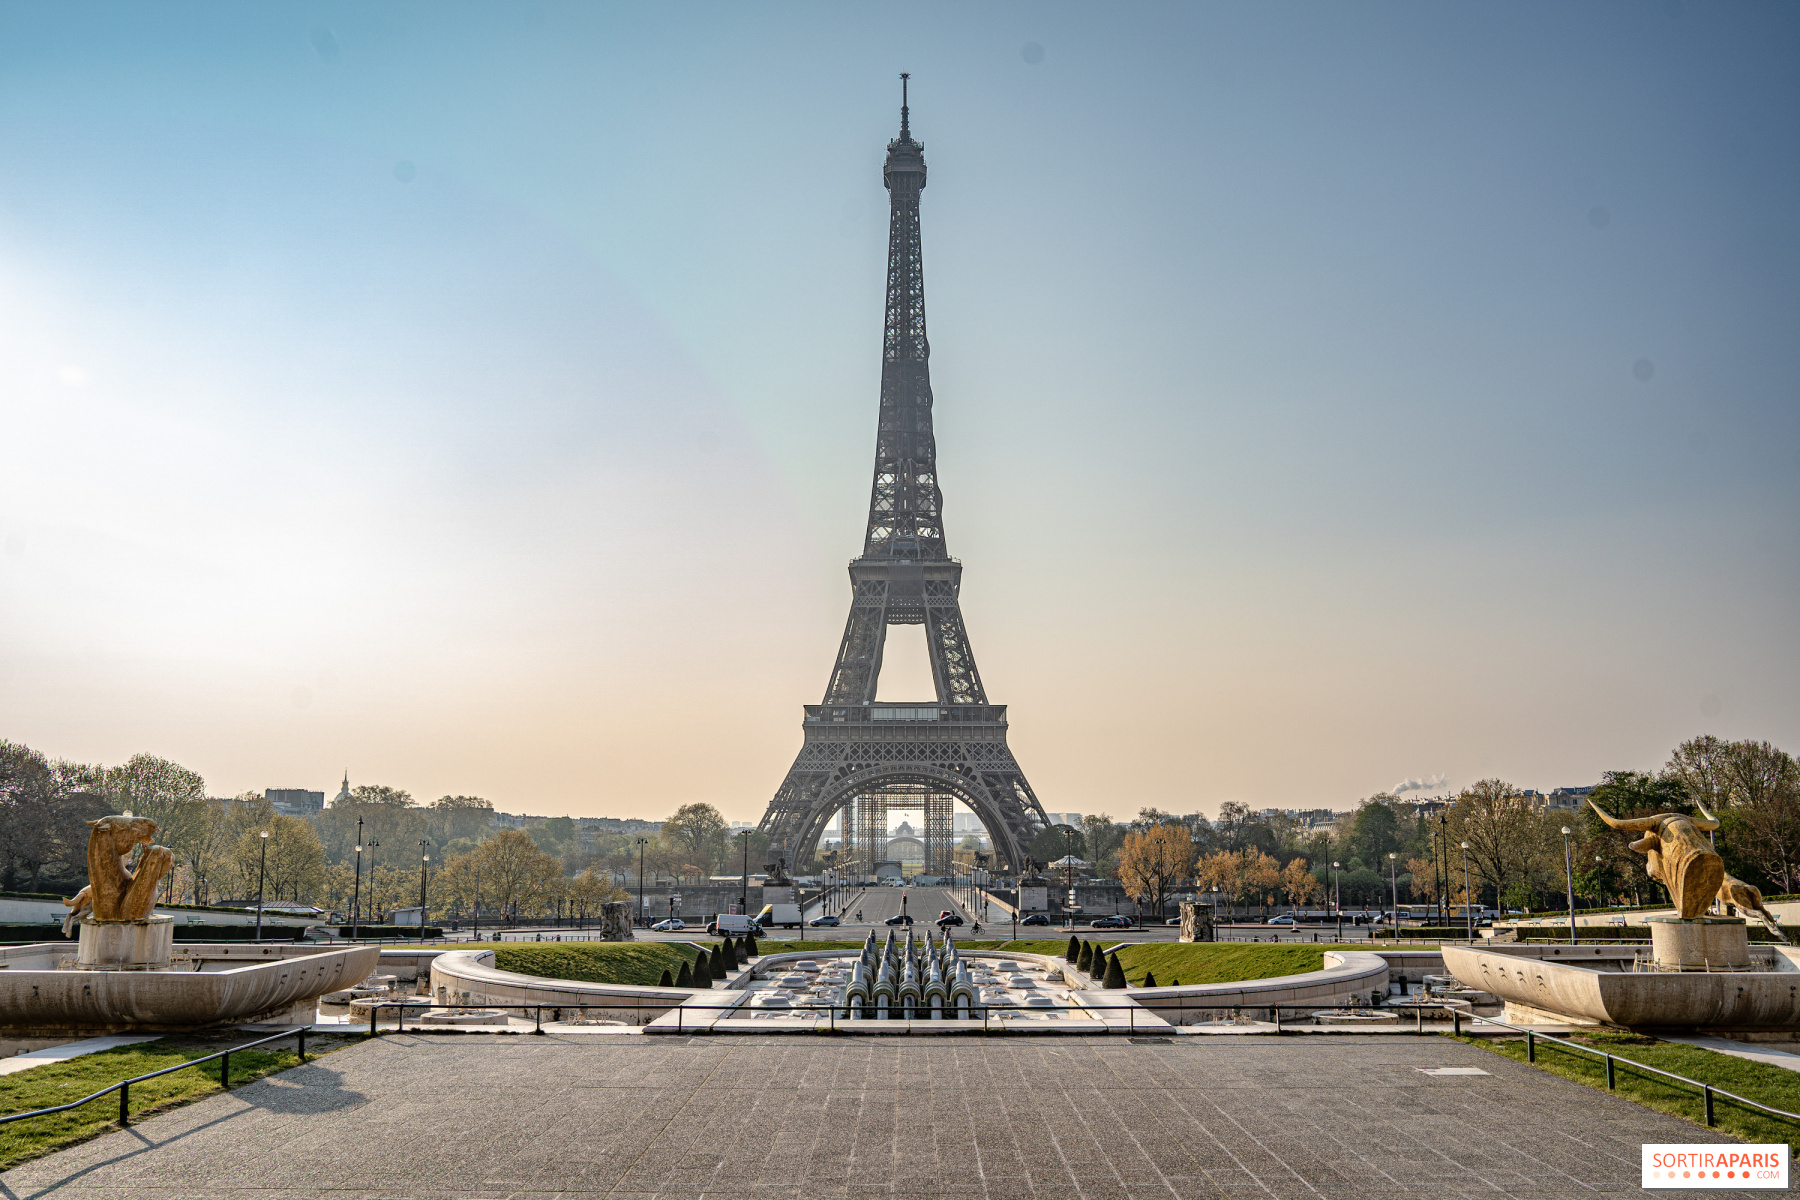 Eiffel Tower: antigenic tests provided to visitors without a health pass.